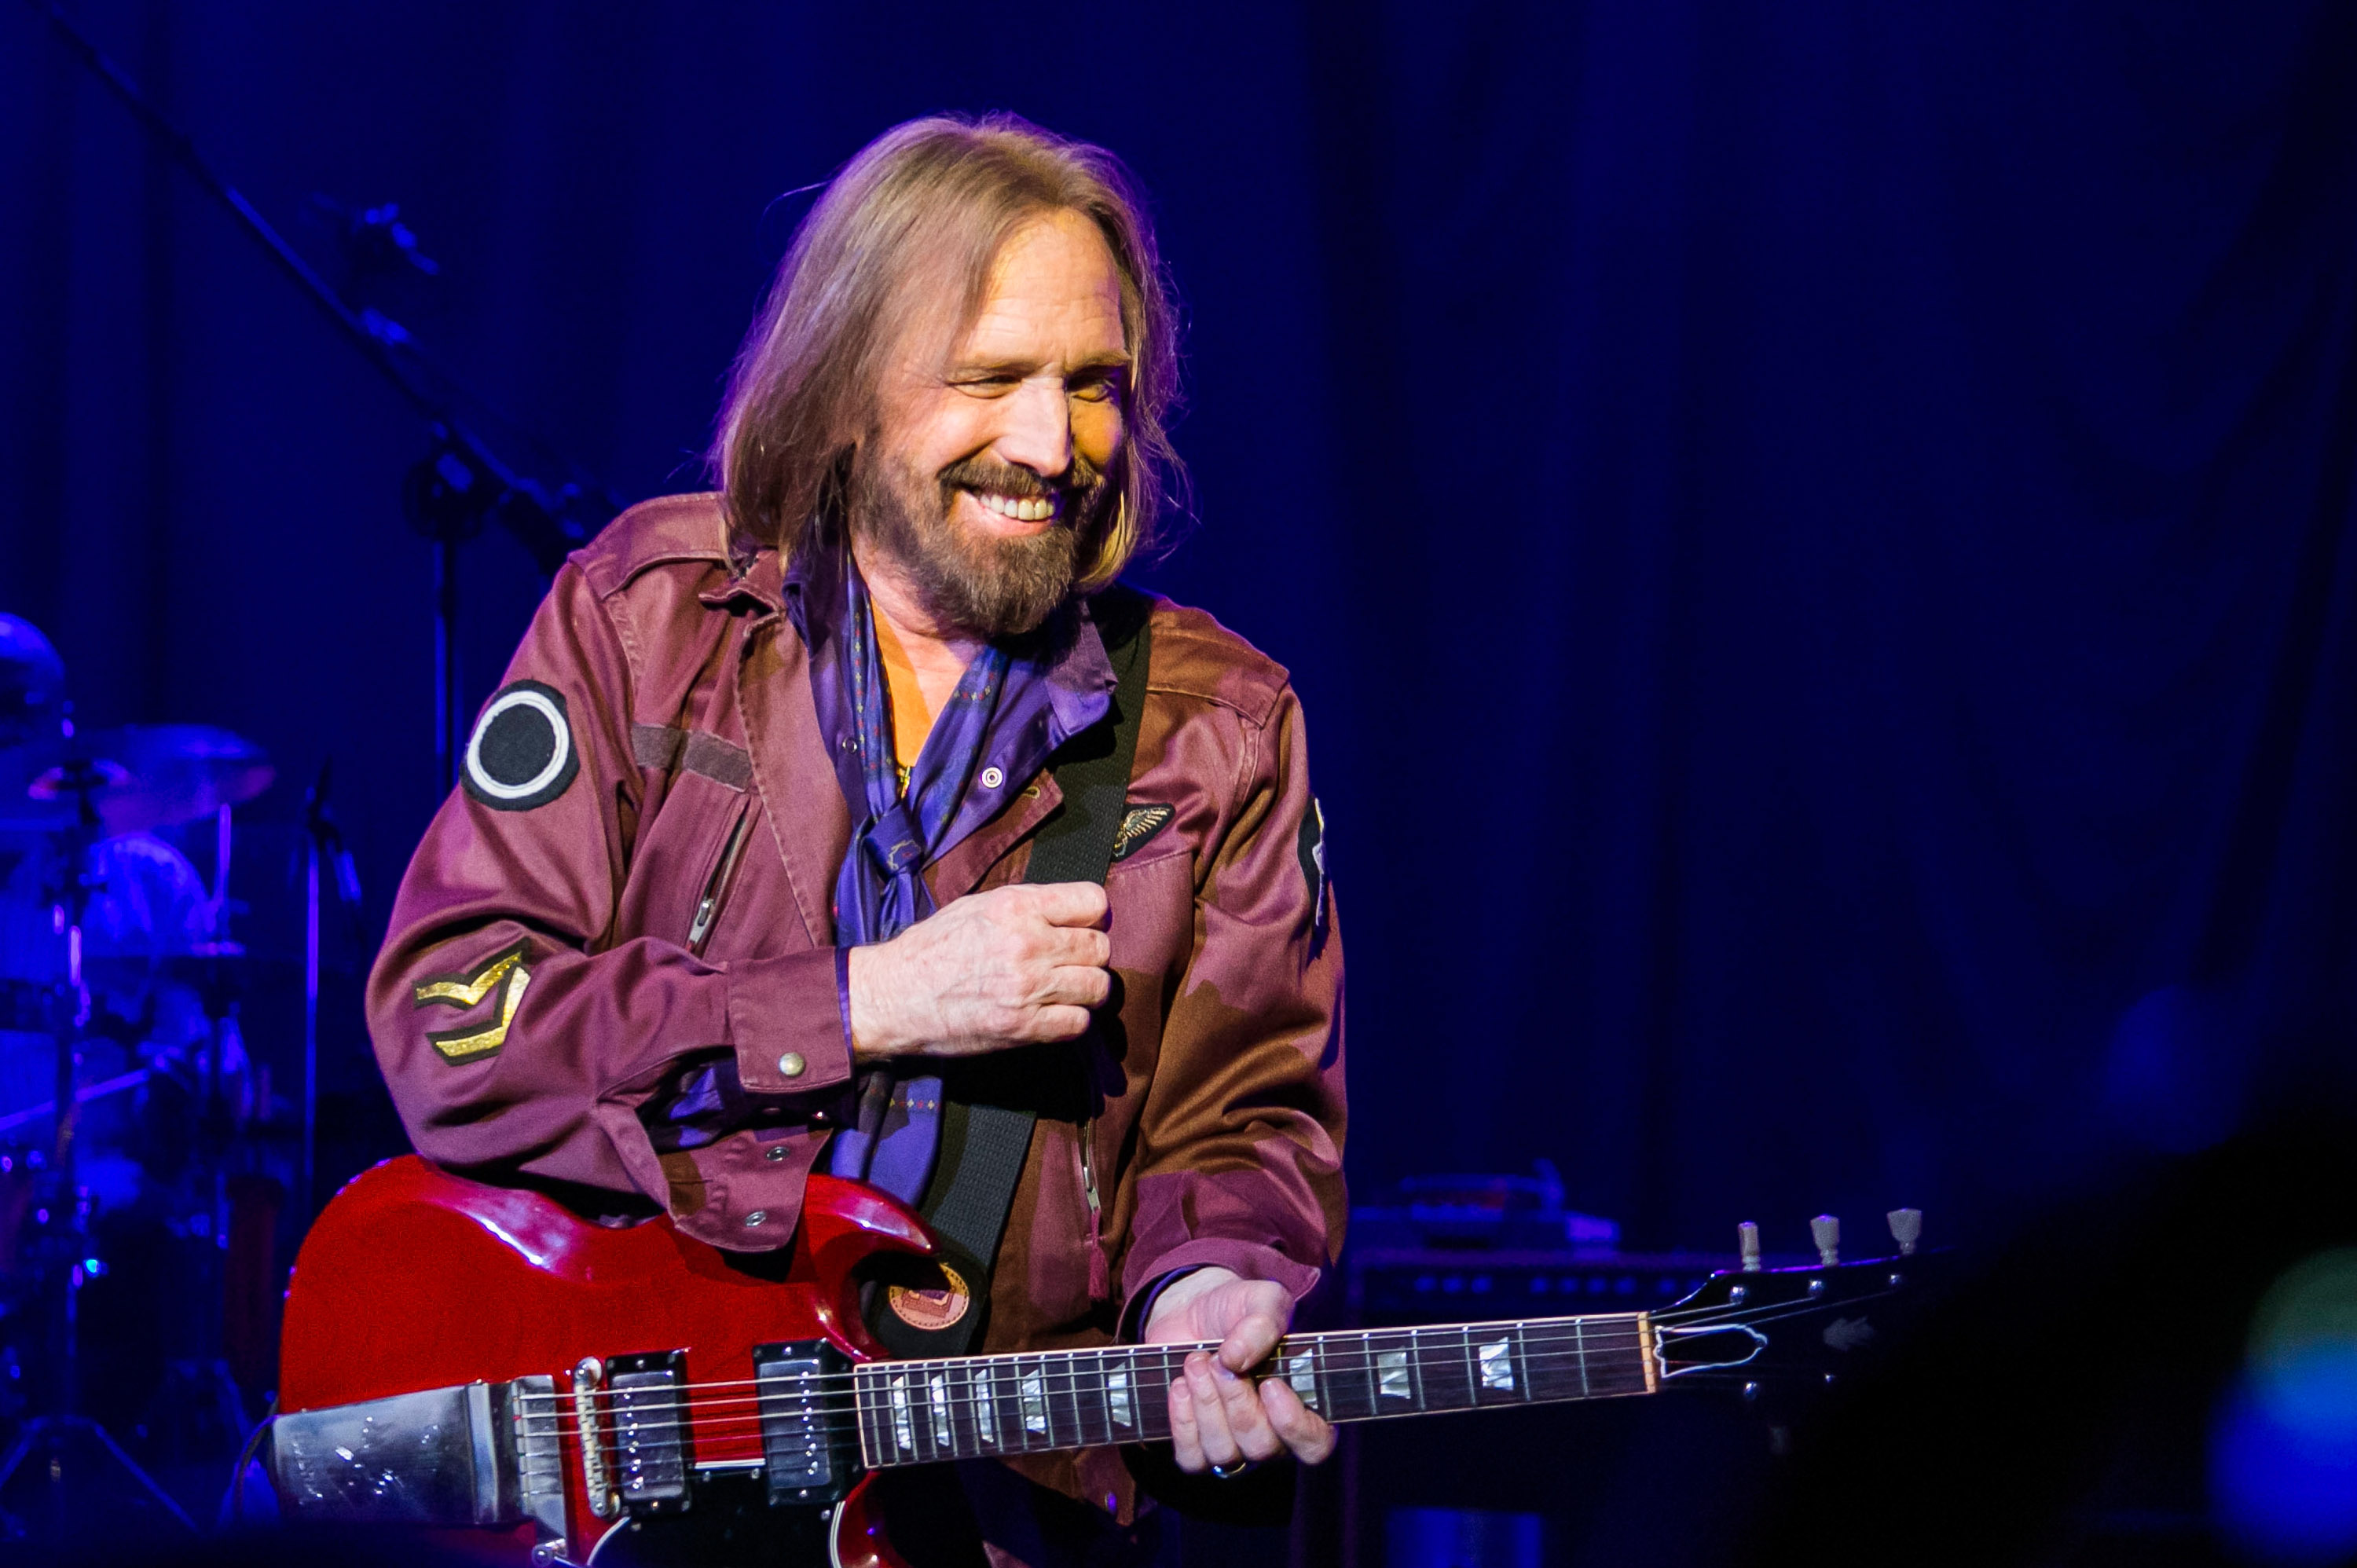 Tom Petty stands onstage and plays a red guitar.